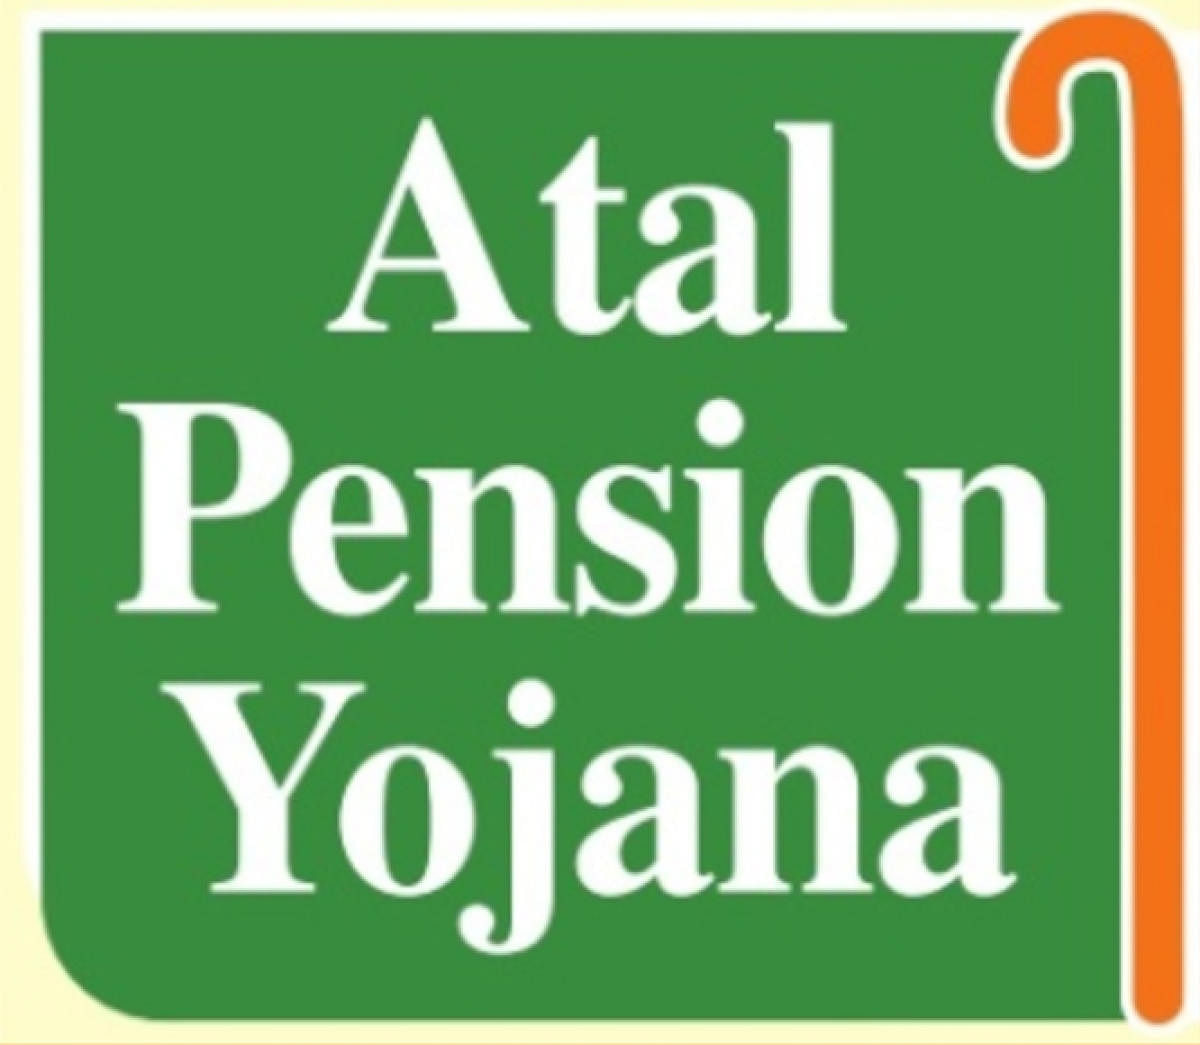 Atal Pension Yojana subscribers can change contribution amount anytime during year